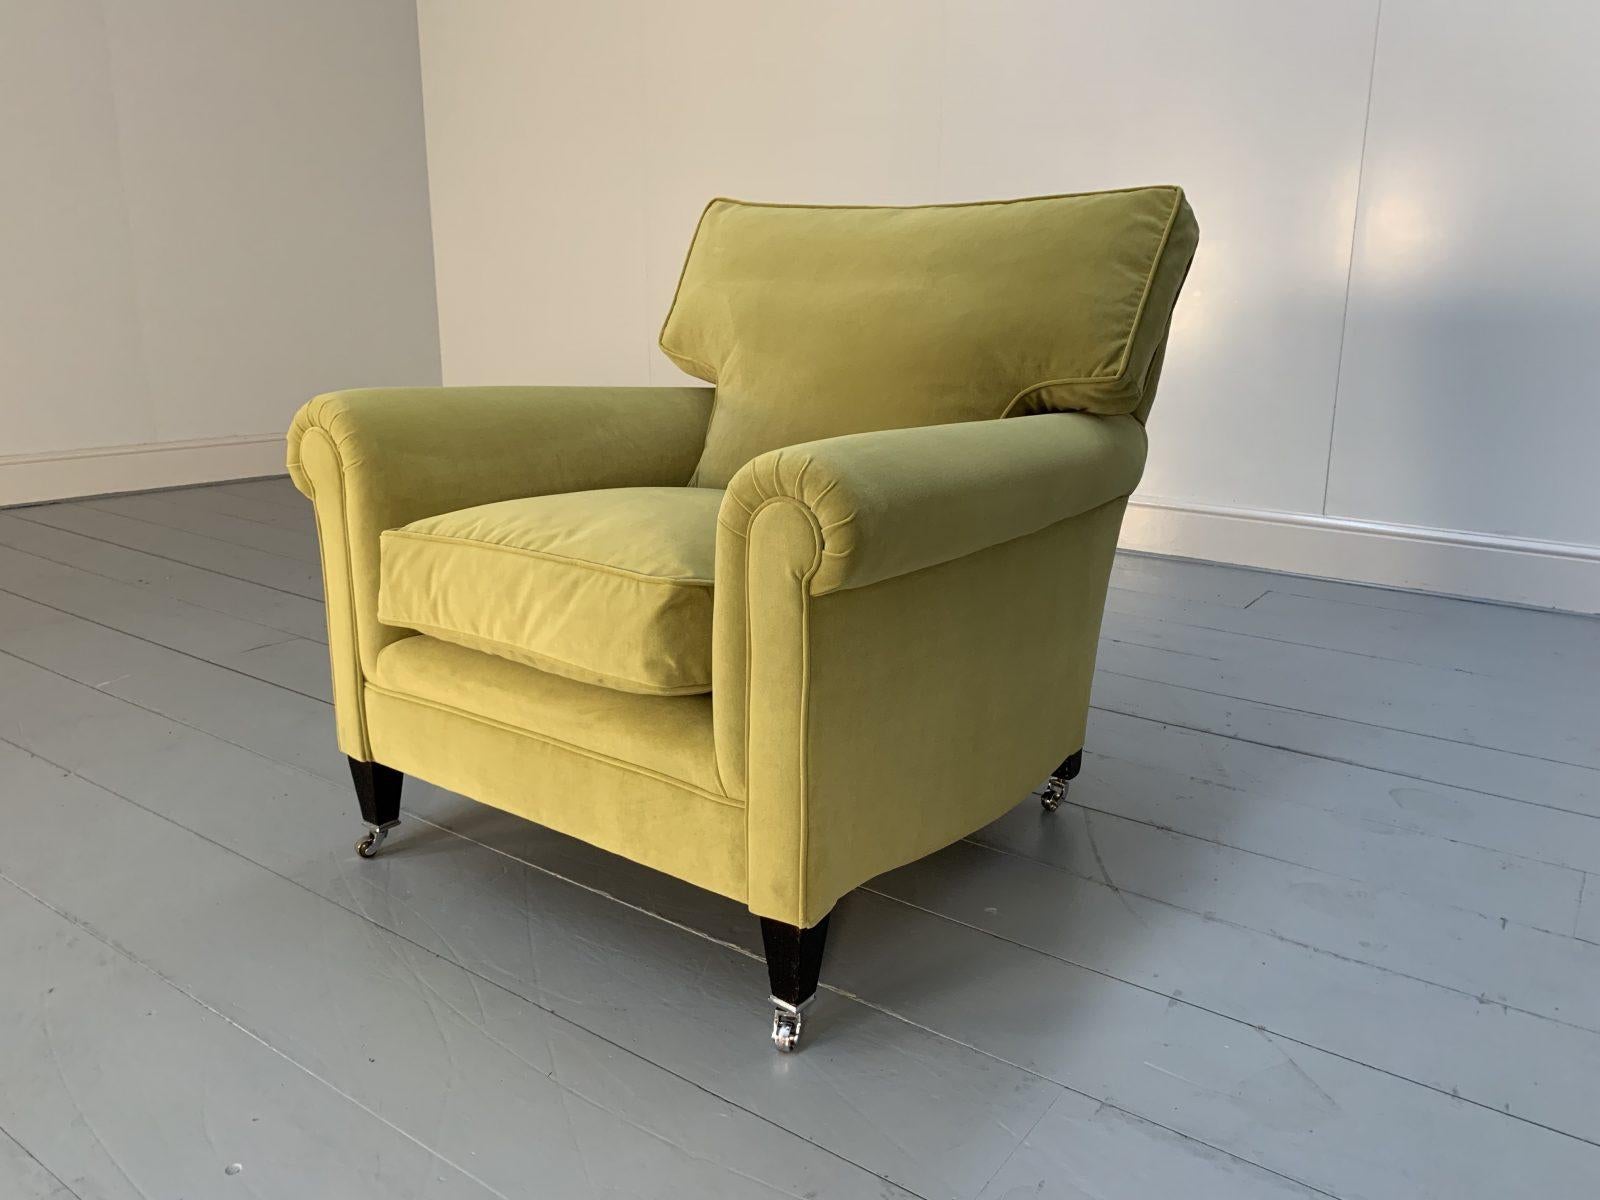 This is a superb, pristine George Smith Signature “Full Scroll-Arm” Large Cushion-Back Armchair, dressed in their peerless, elegant, highly-seductive and sensationally-tactile short-pile Italian-velvet in a vibrant yellow hue.

In a world of